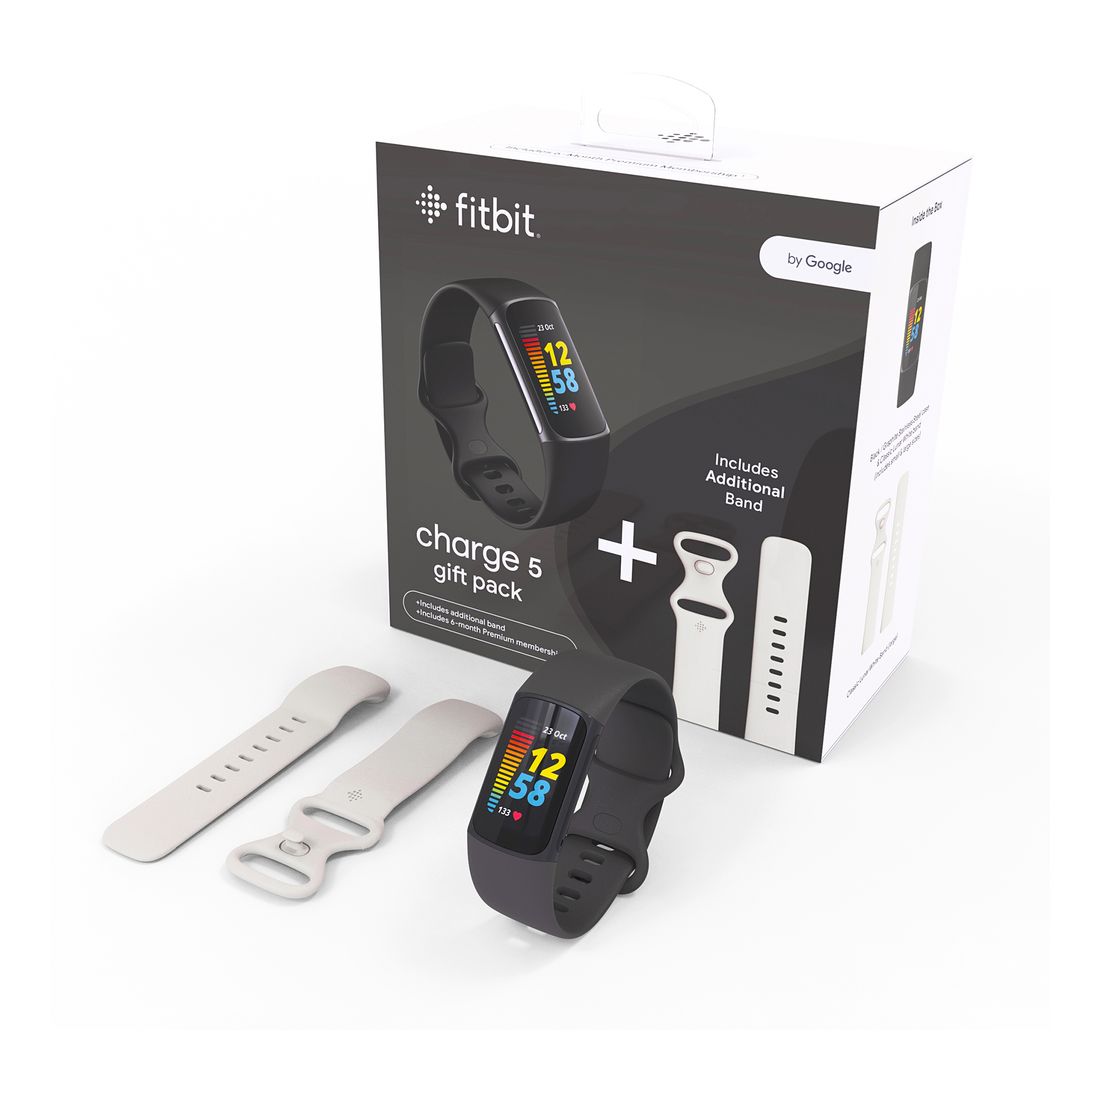 Fitbit Charge 5 Health and Fitness Tracker - Black/Black/White (Bundle)